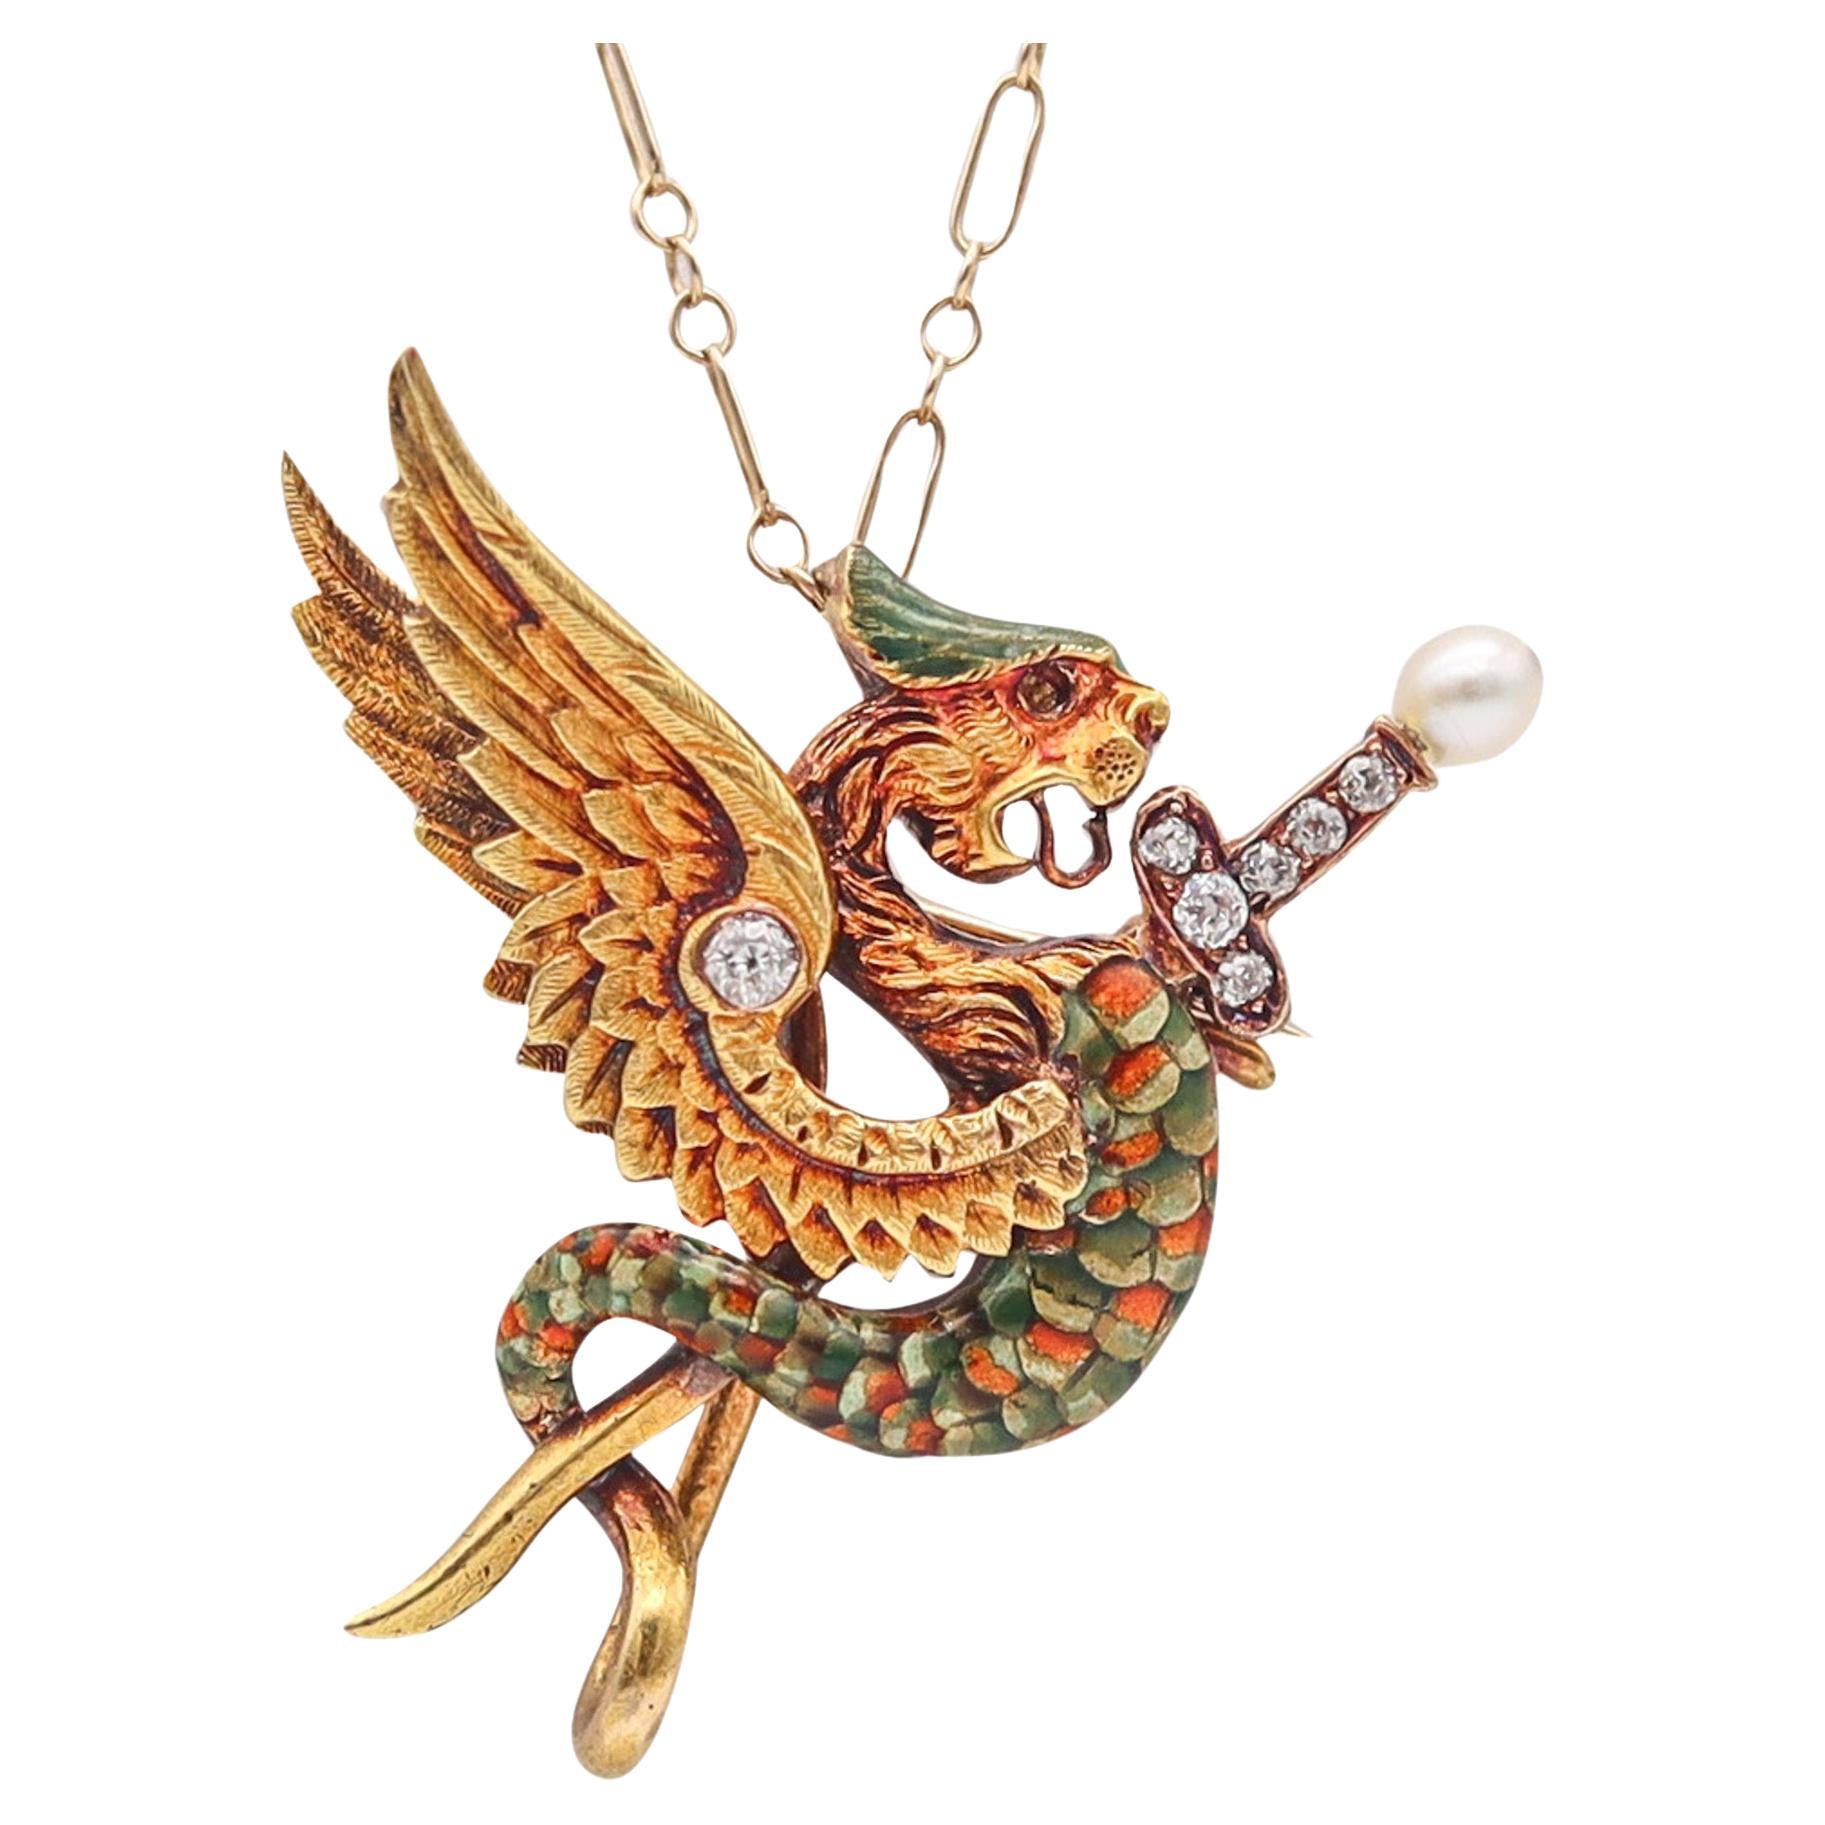 England 1870 Neo Gothic Pendant With Griffin In 18Kt Yellow Gold With Diamonds For Sale